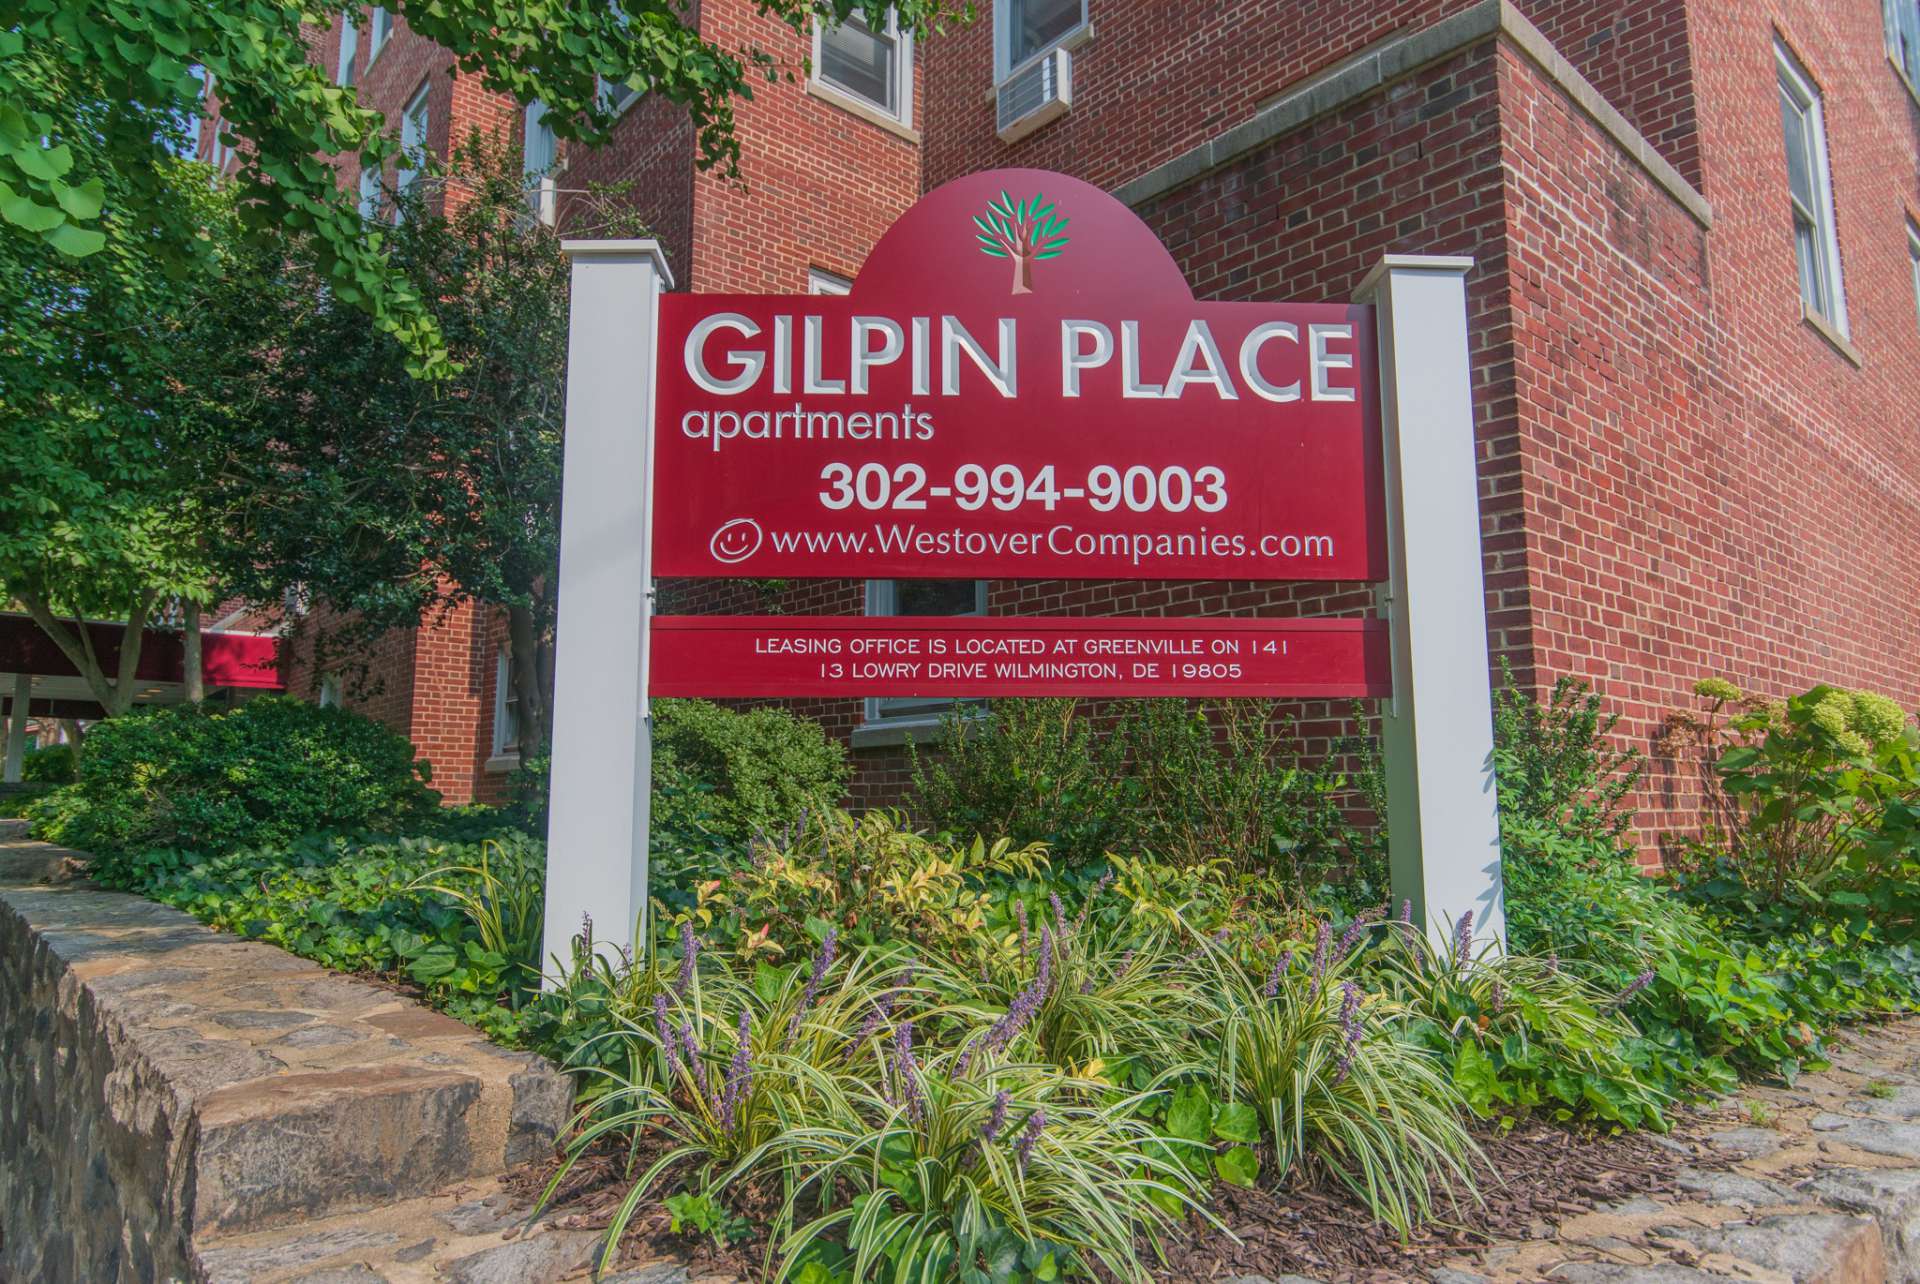 Gilpin Place apartments welcome sign, fitted in a beautiful garden